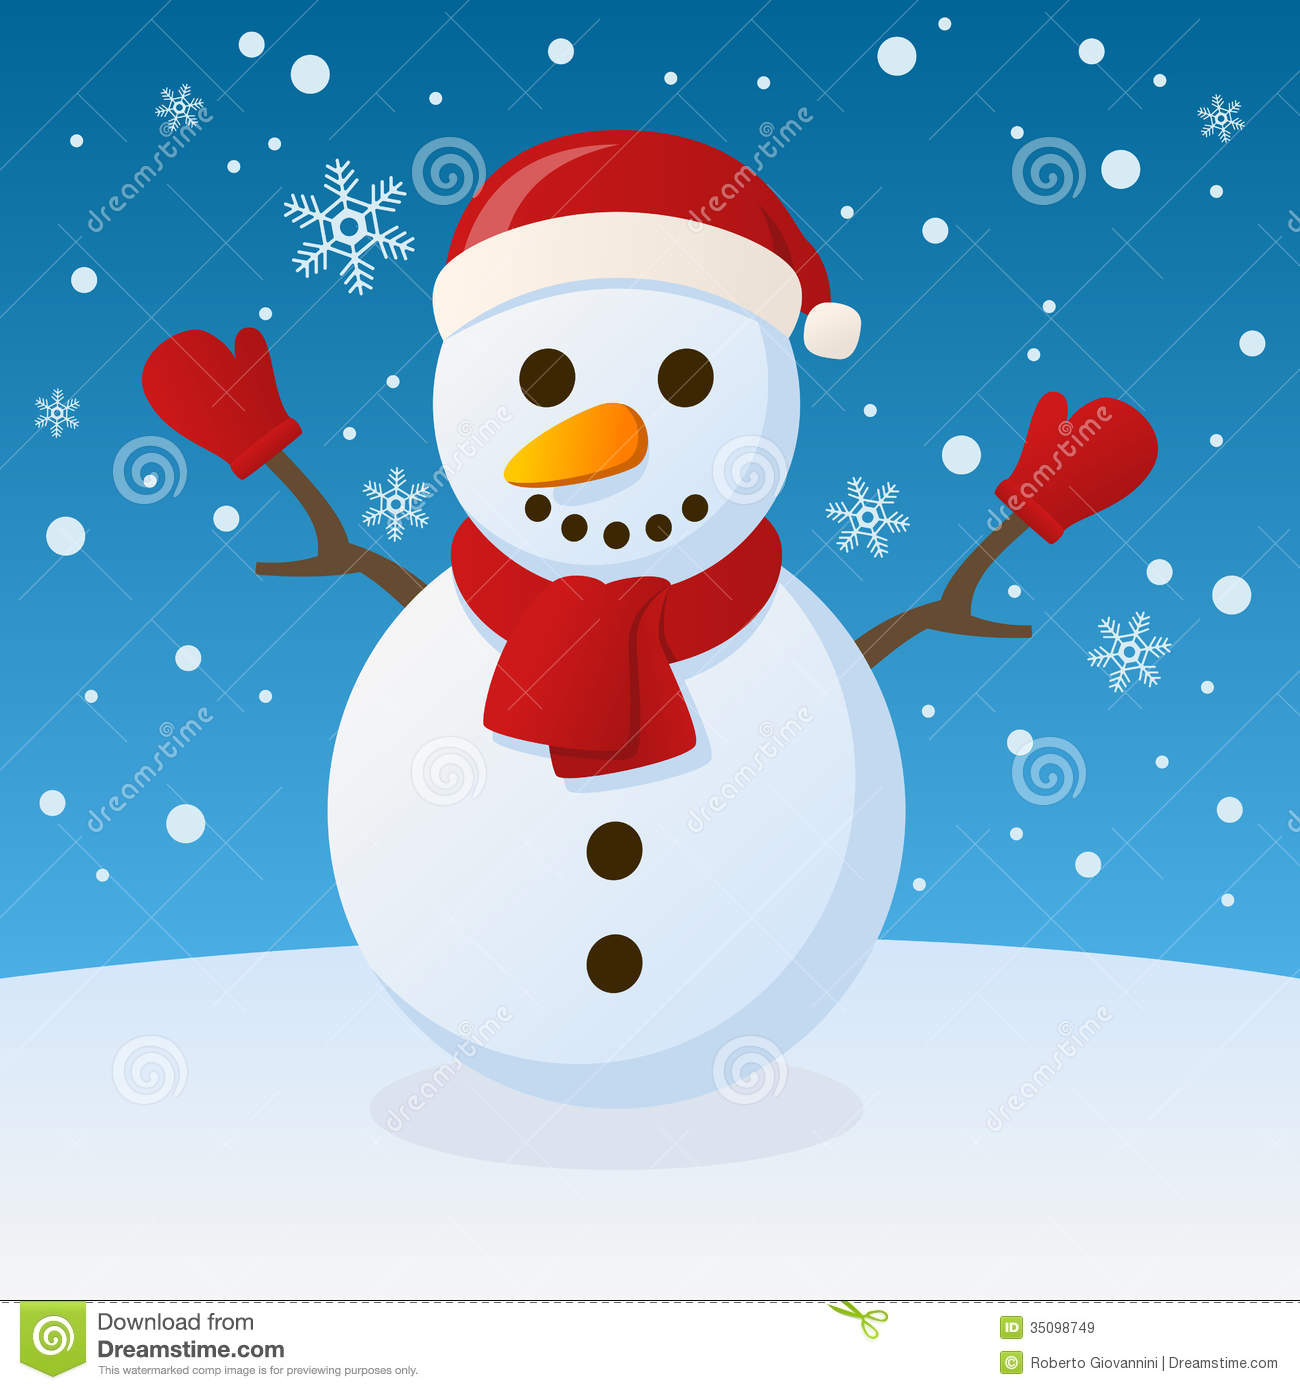 Cartoon Snowman Character With Red Scarf And Gloves In A Snowy Scene